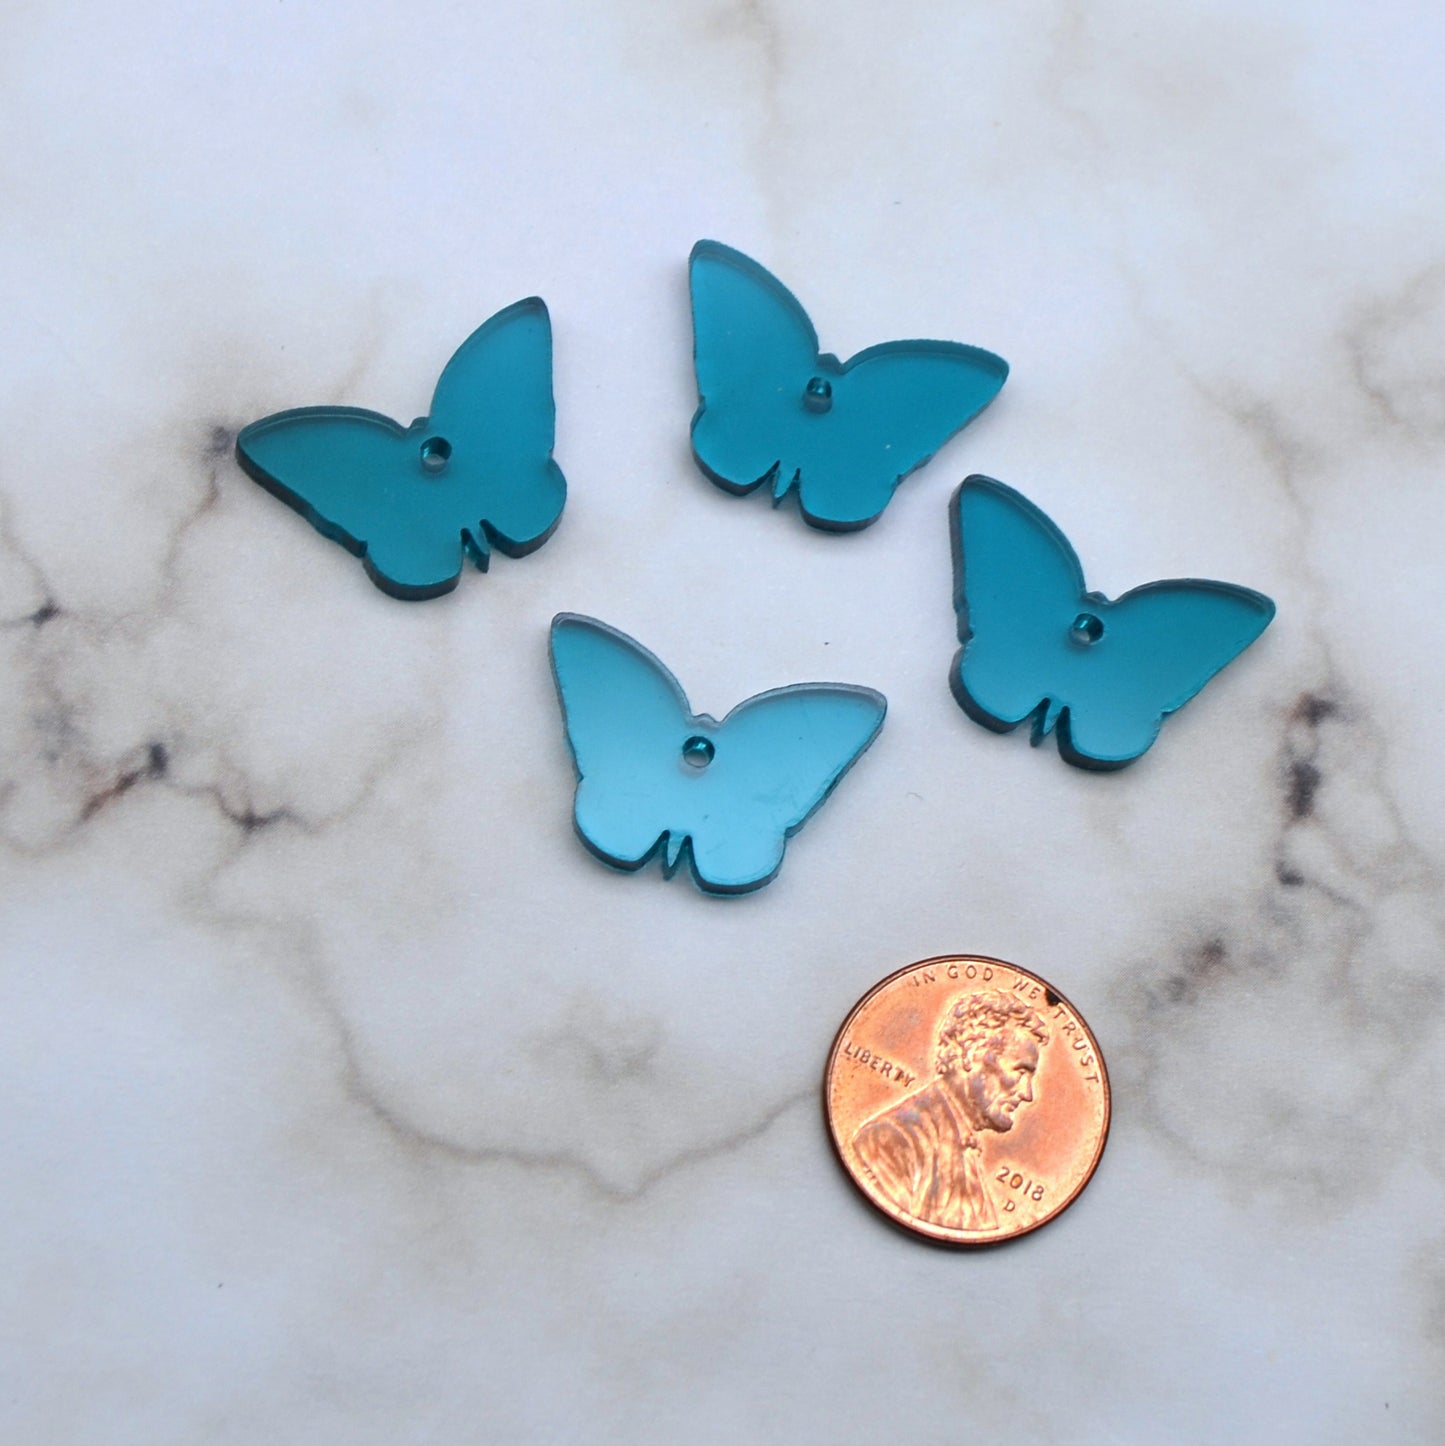 CLEAR TEAL BUTTERFLY CHARMS In Clear Teal Laser Cut Acrylic